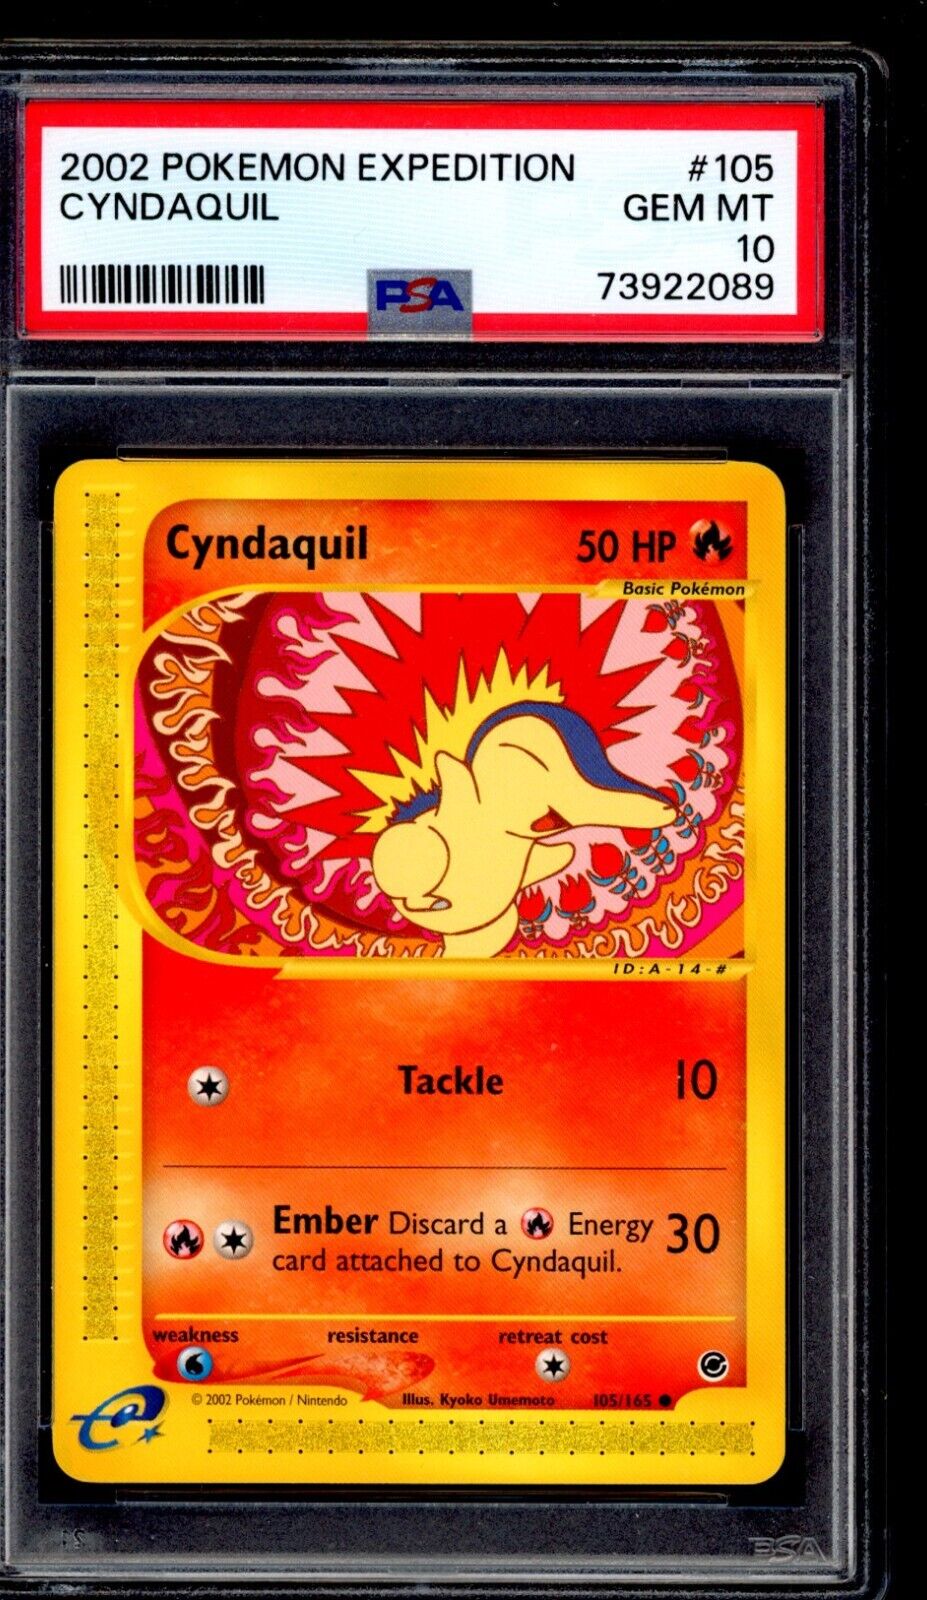 PSA 10 Cyndaquil 2002 Pokemon Card 105/165 Expedition